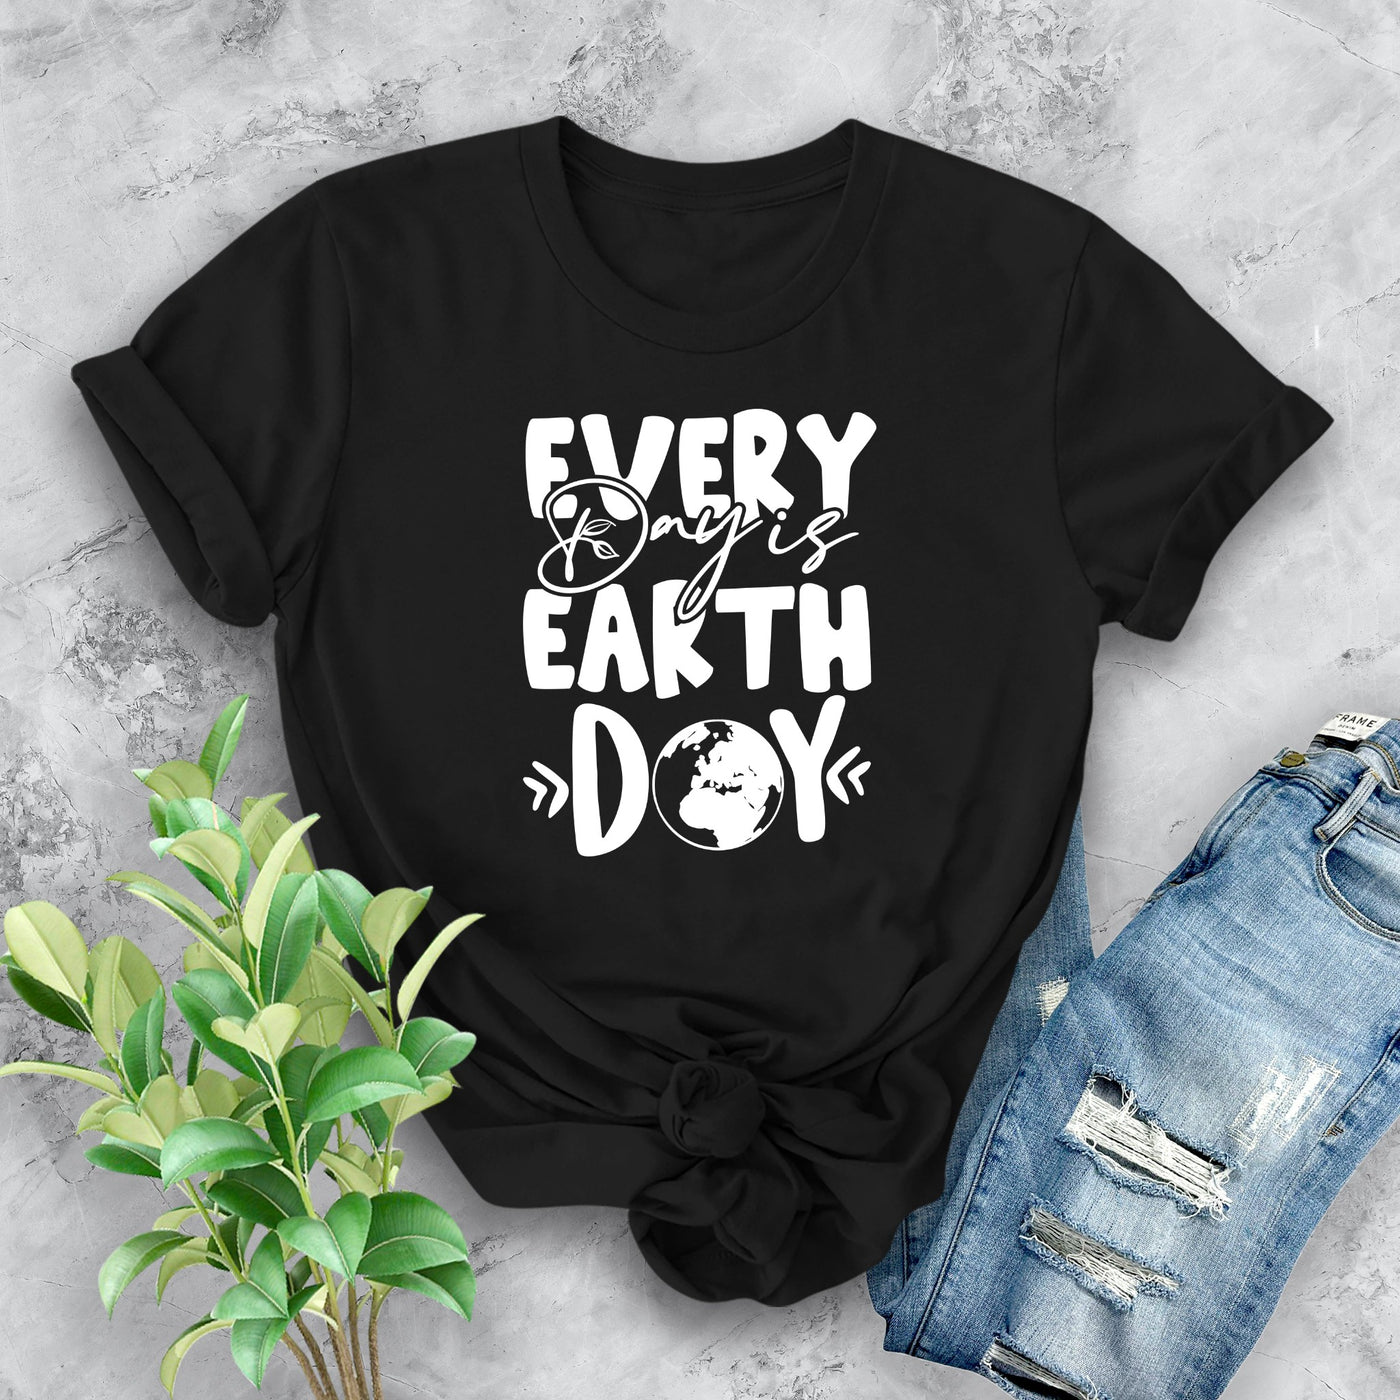 Every Day is Earth Day T-Shirt